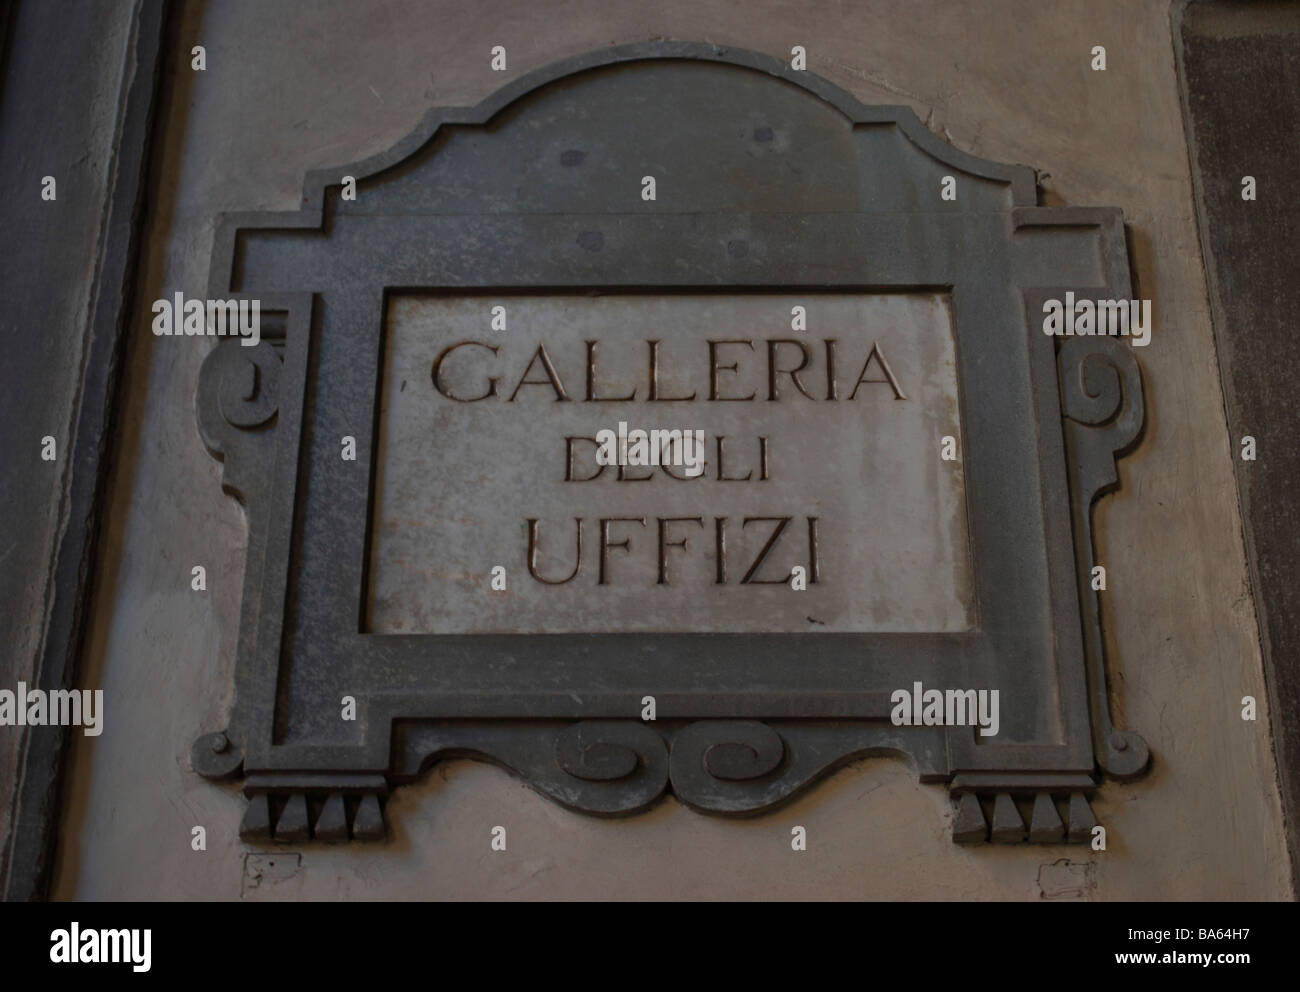 Exterior sign for the Uffizi Gallery, Florence, Italy Stock Photo